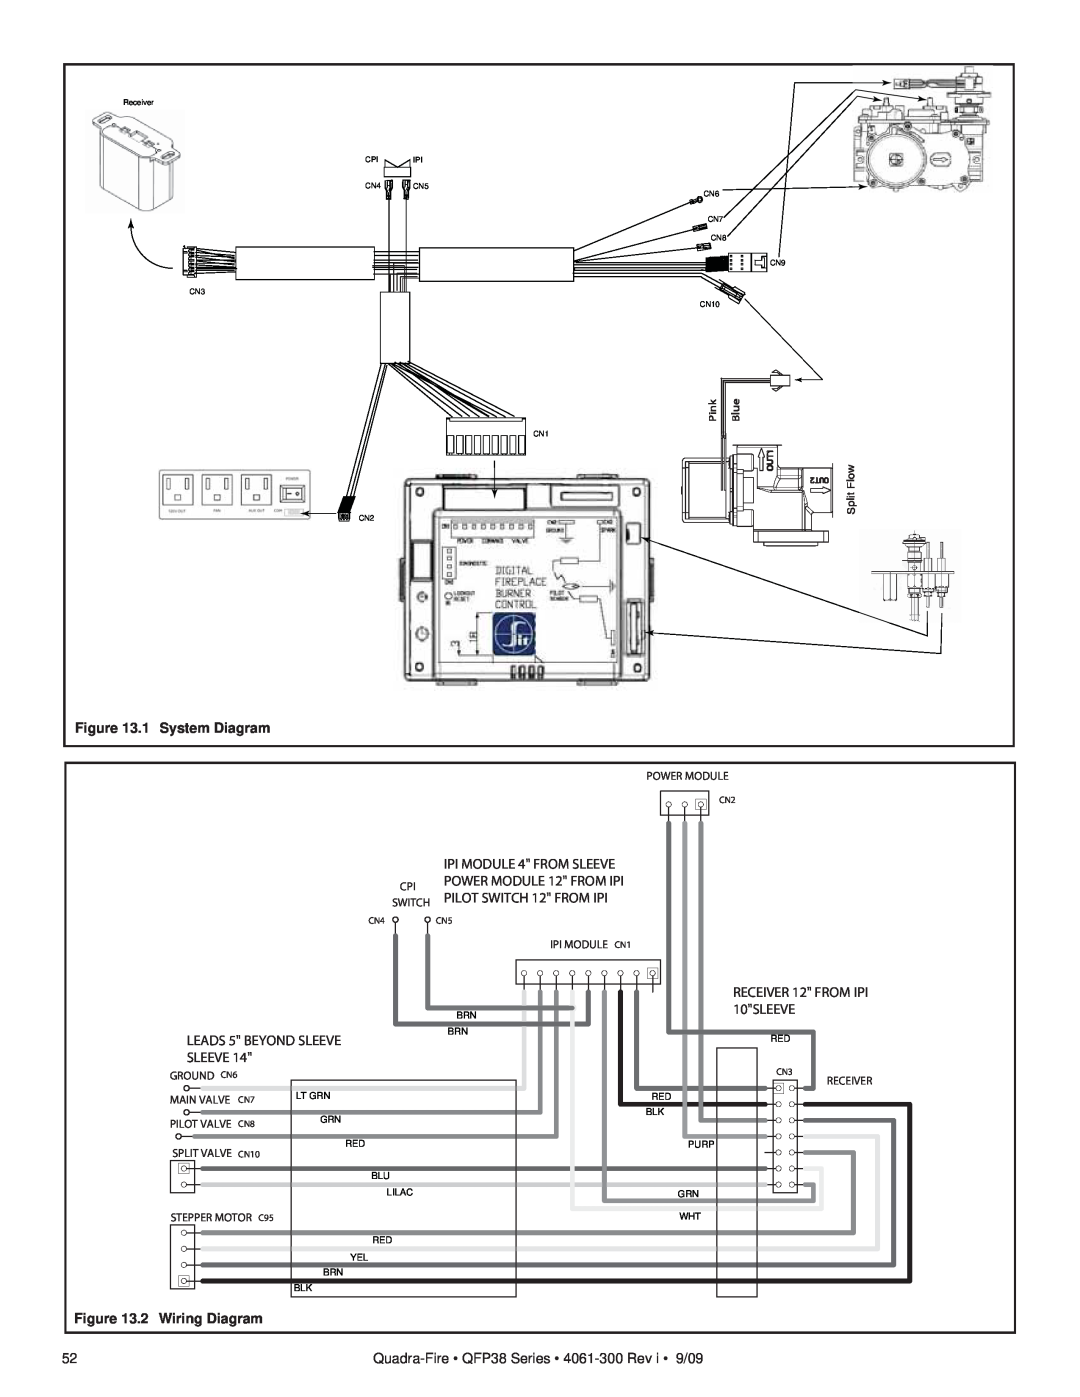 Quadra-Fire QFP38-NG System Diagram, IPI MODULE 4 FROM SLEEVE, PILOT SWITCH 12 FROM IPI, 10SLEEVE, LEADS 5 BEYOND SLEEVE 